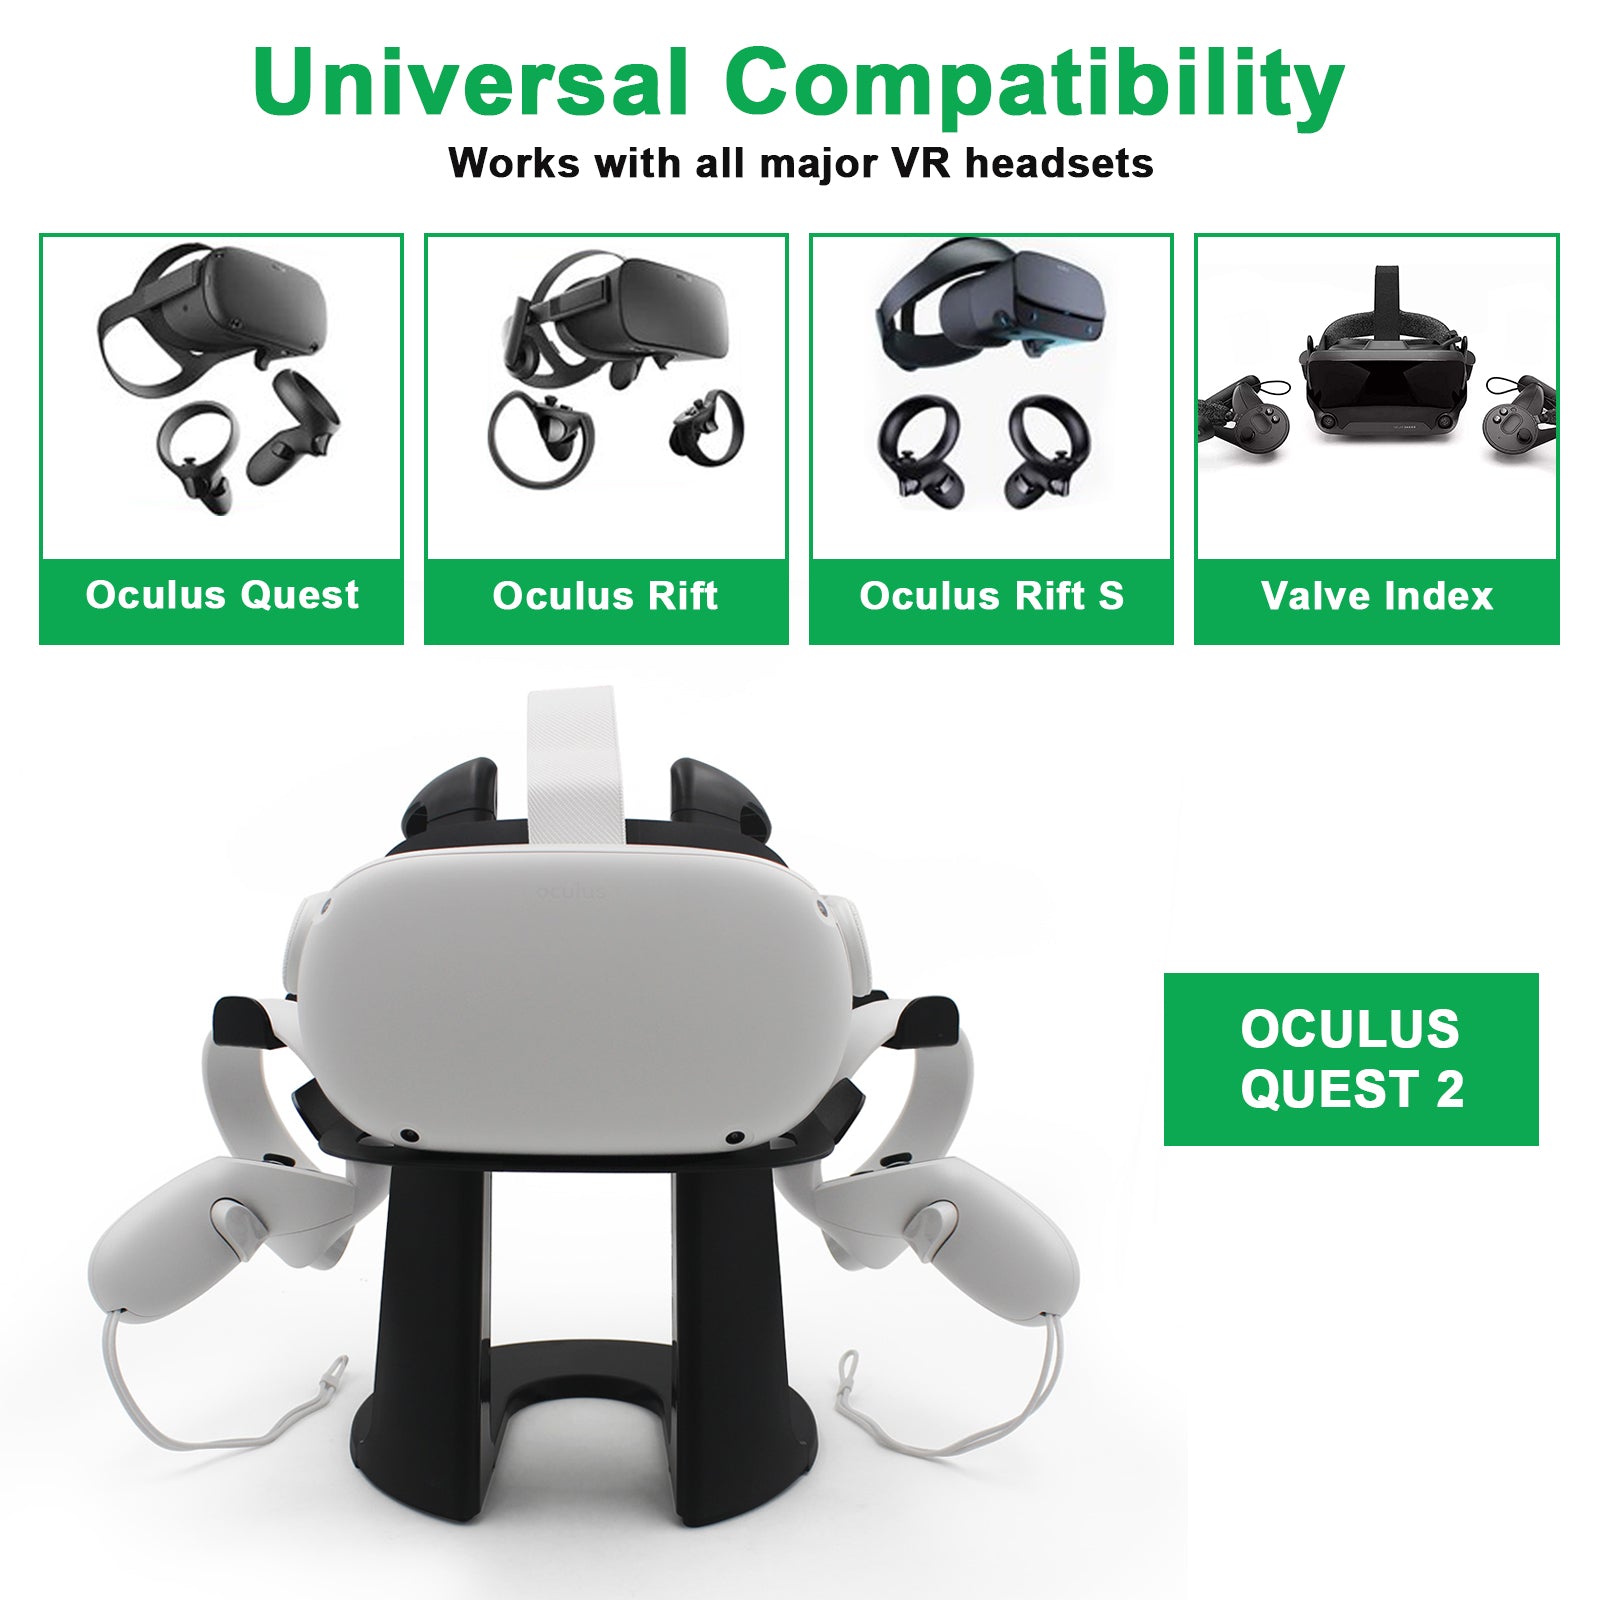 Stand is compatible with Oculus Quest, Oculus Rift, Oculus Rift S, and Valve Index.